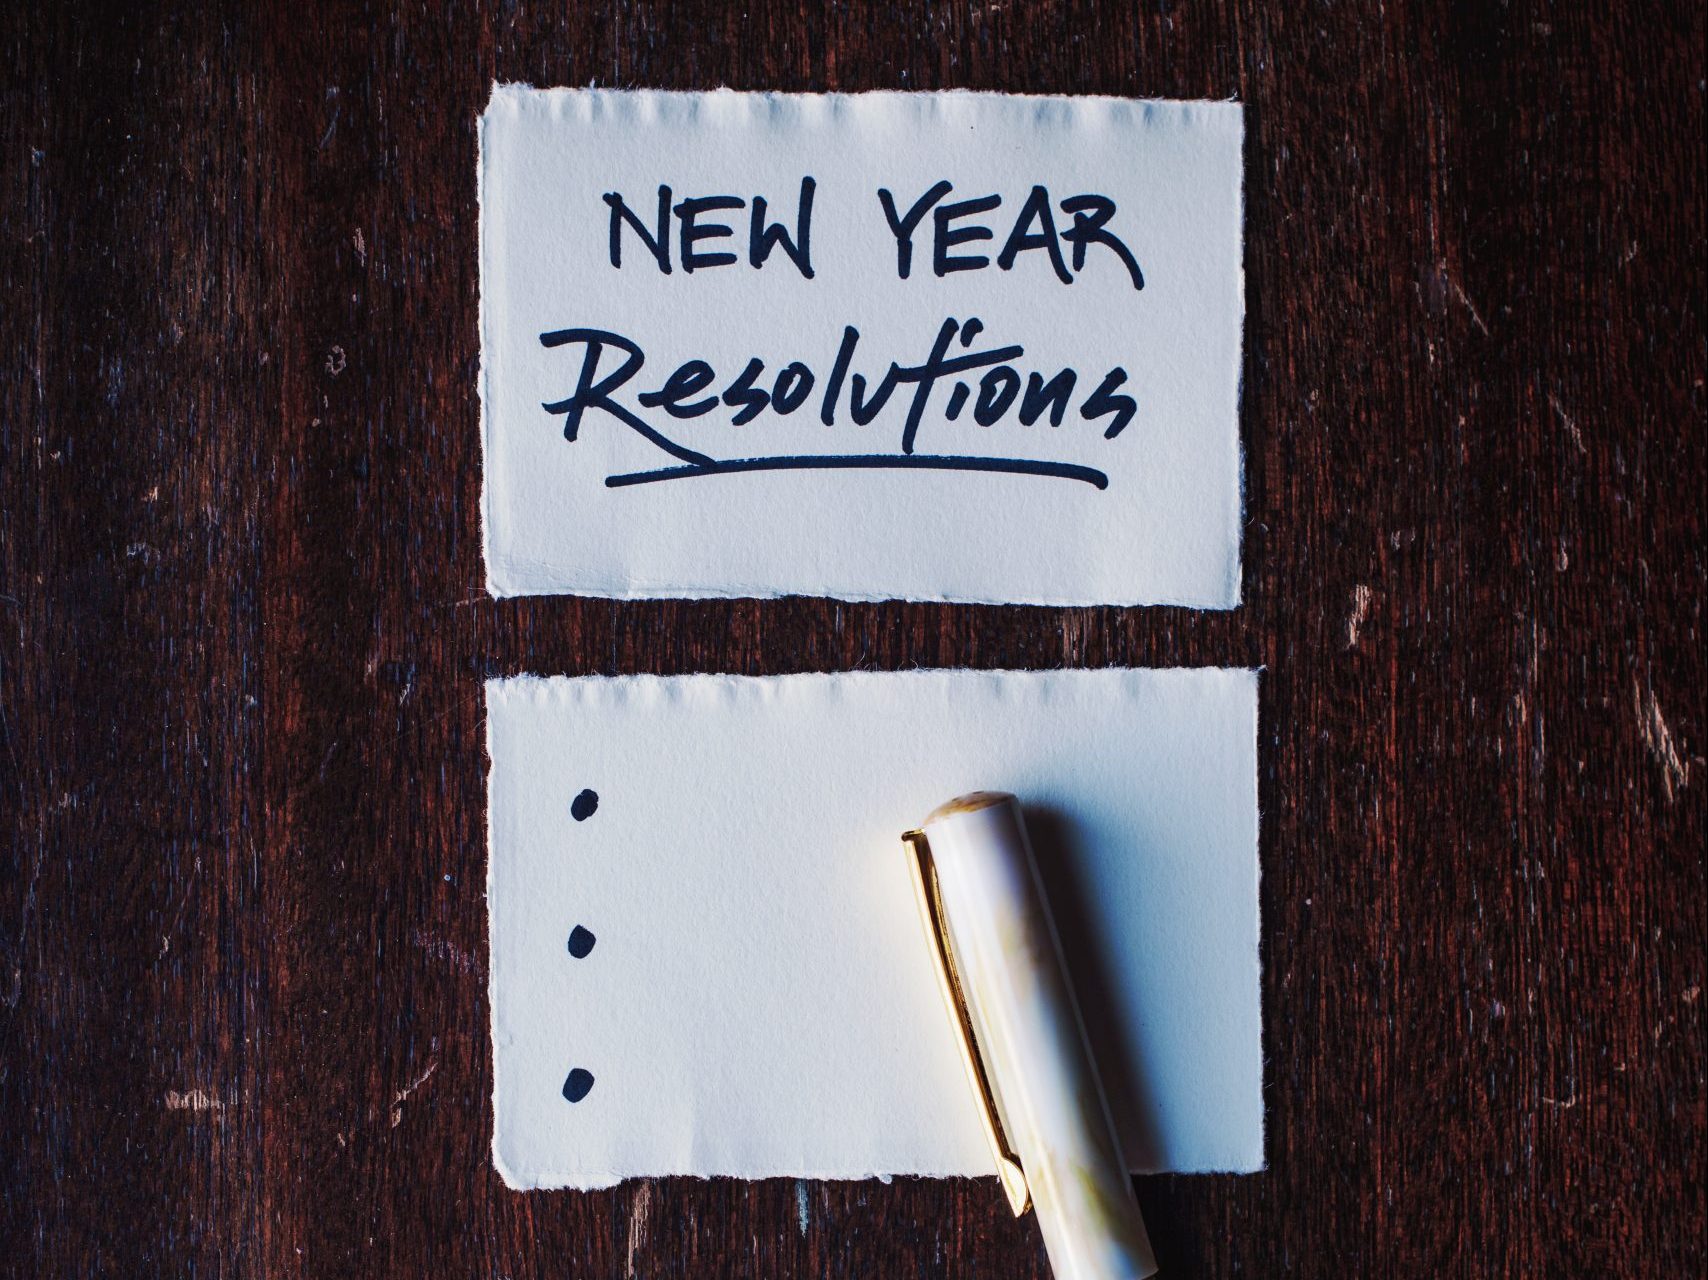 Photo of a piece of lined paper with "New Year's Resolutions" written at the top and a pen beside it.